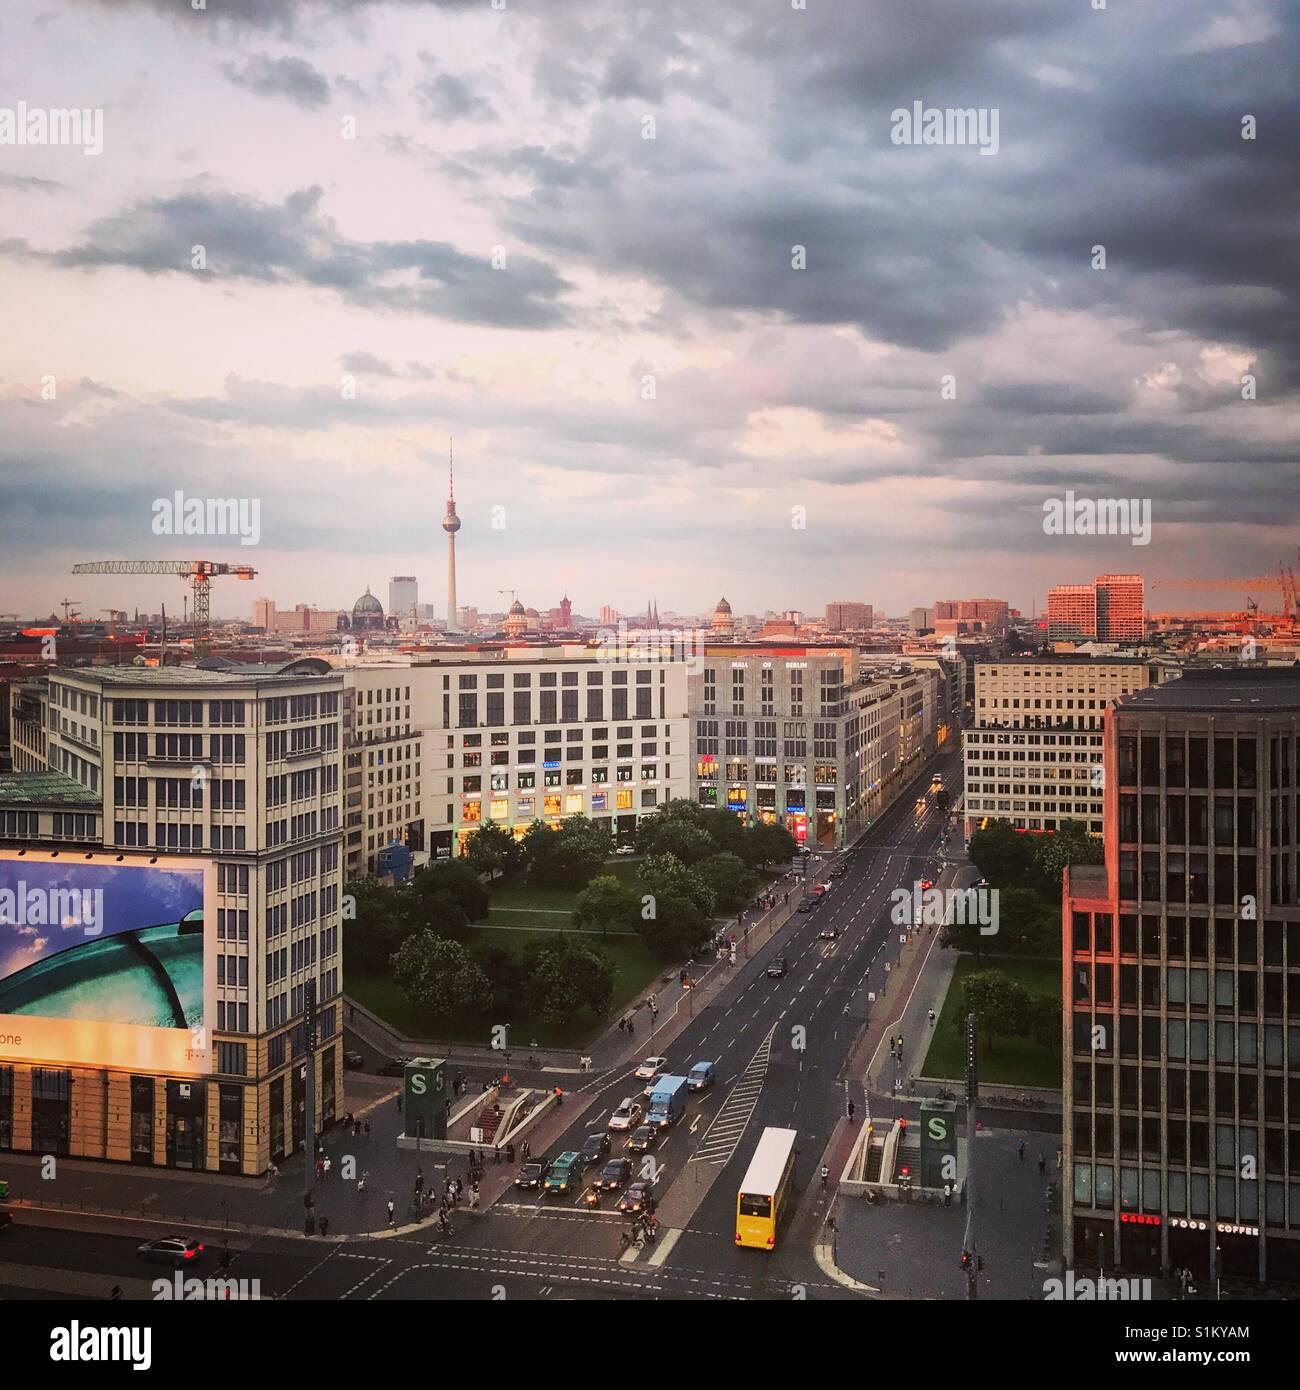 View over Leipziger Platz as the sun begins to set in Berlin, Germany in August 2017. Stock Photo